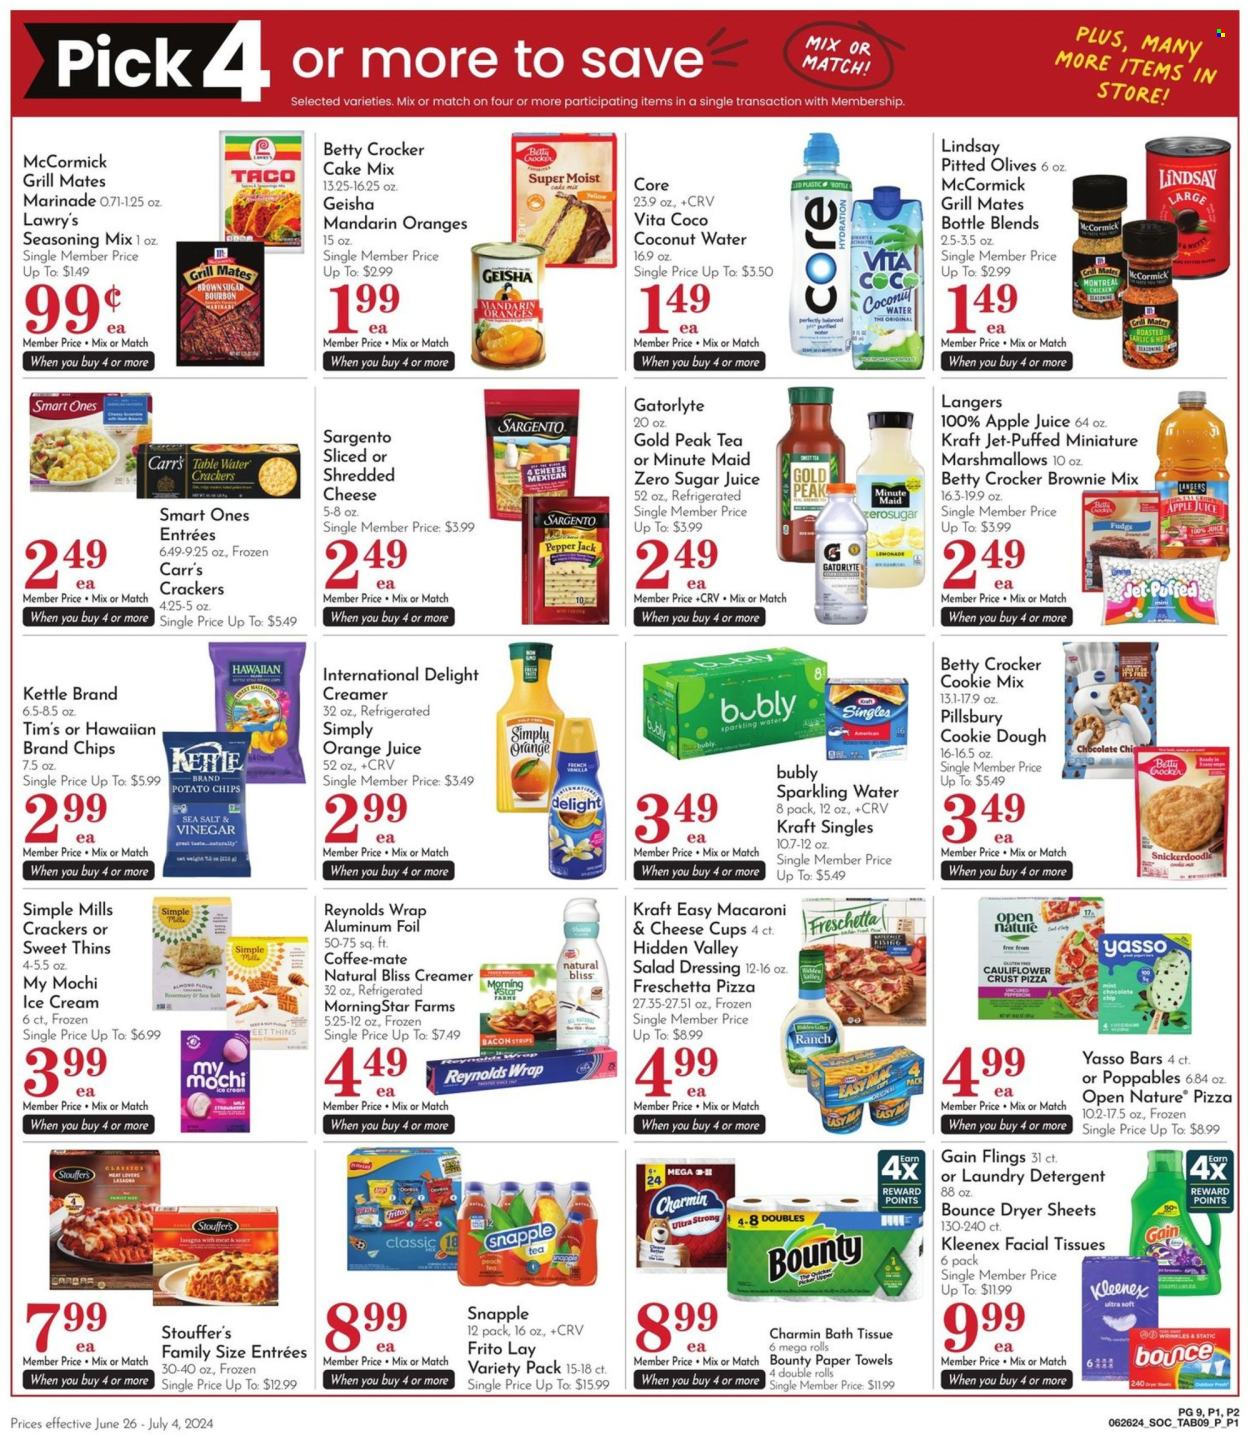 thumbnail - Pavilions Flyer - 06/26/2024 - 07/04/2024 - Sales products - brownie mix, cake mix, mandarines, macaroni & cheese, pizza, pasta, Pillsbury, lasagna meal, Kraft®, ready meal, sandwich slices, Pepper Jack cheese, Kraft Singles, Sargento, Coffee-Mate, creamer, coffee and tea creamer, ice cream, Stouffer's, Bounty, crackers, Fritos, potato chips, Thins, salty snack, almond flour, baking mix, spice, seasoning, salad dressing, dressing, marinade, apple juice, lemonade, orange juice, juice, ice tea, coconut water, Snapple, Gold Peak Tea, electrolyte drink, sparkling water, purified water, alcohol, bath tissue, Kleenex, kitchen towels, paper towels, Charmin, detergent, Gain, laundry detergent, Bounce, dryer sheets, facial tissues. Page 9.